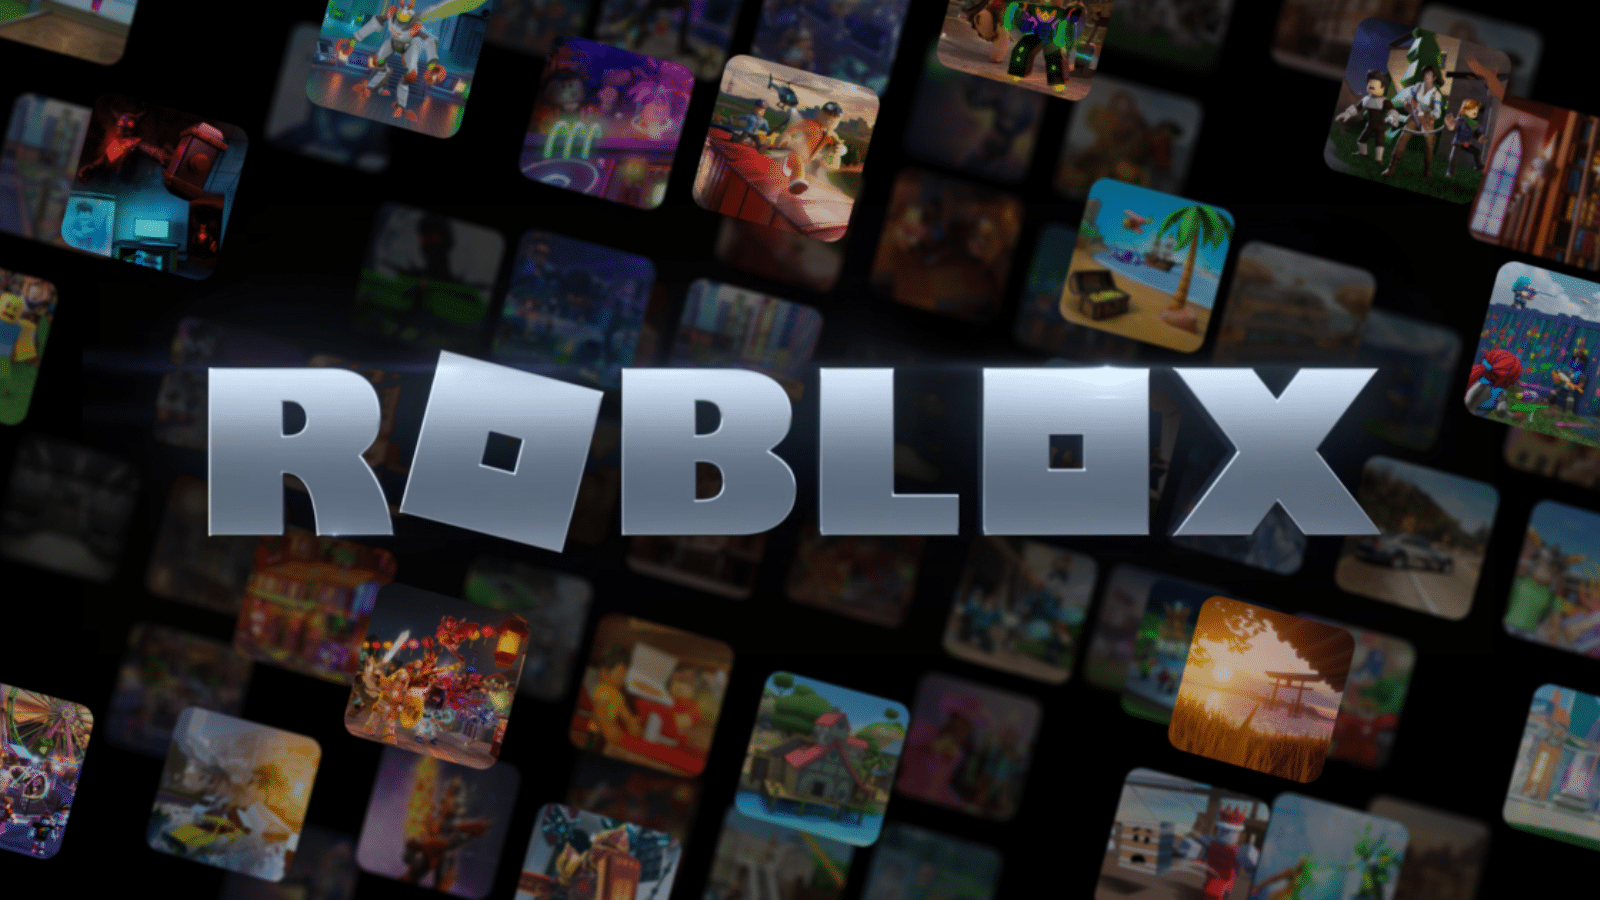 The potential risks and consequences of doxing on Roblox